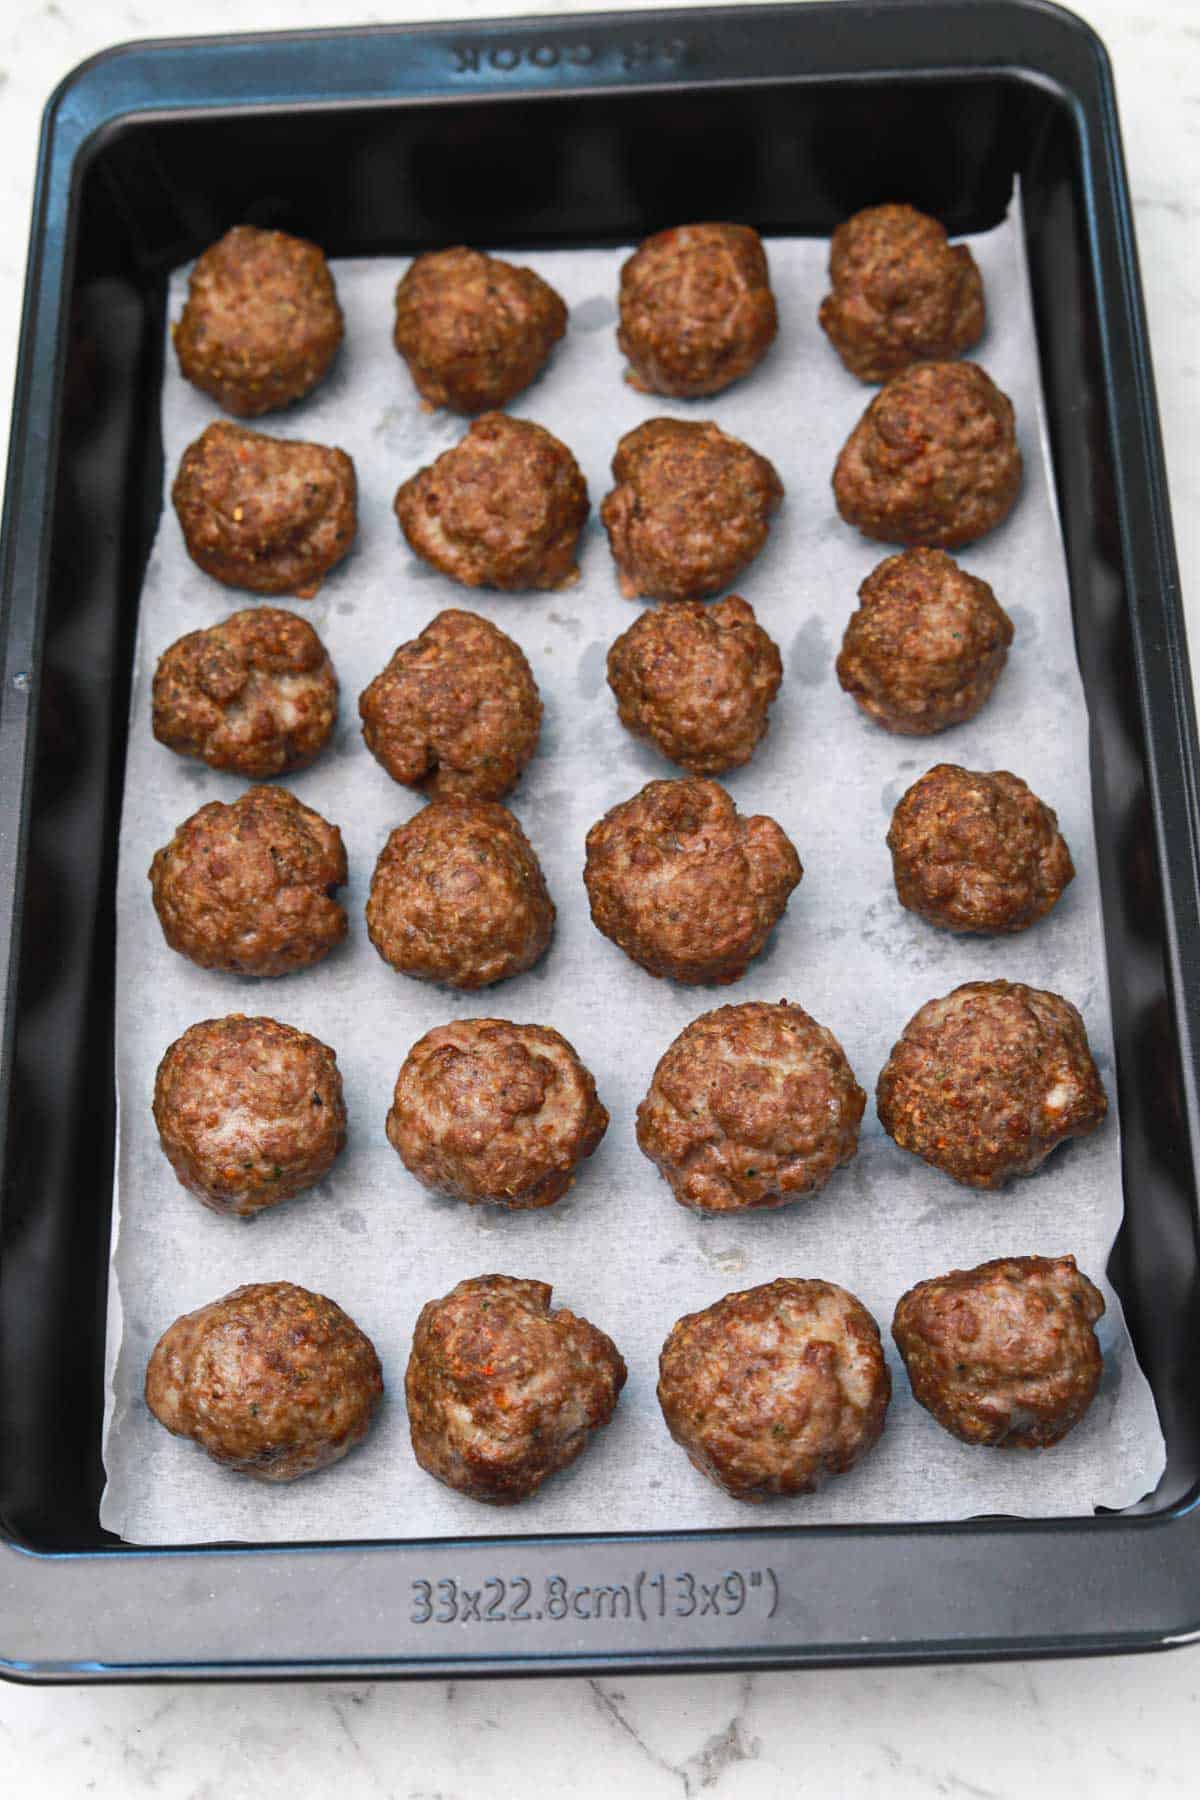 oven baked meatballs on a baking tray.